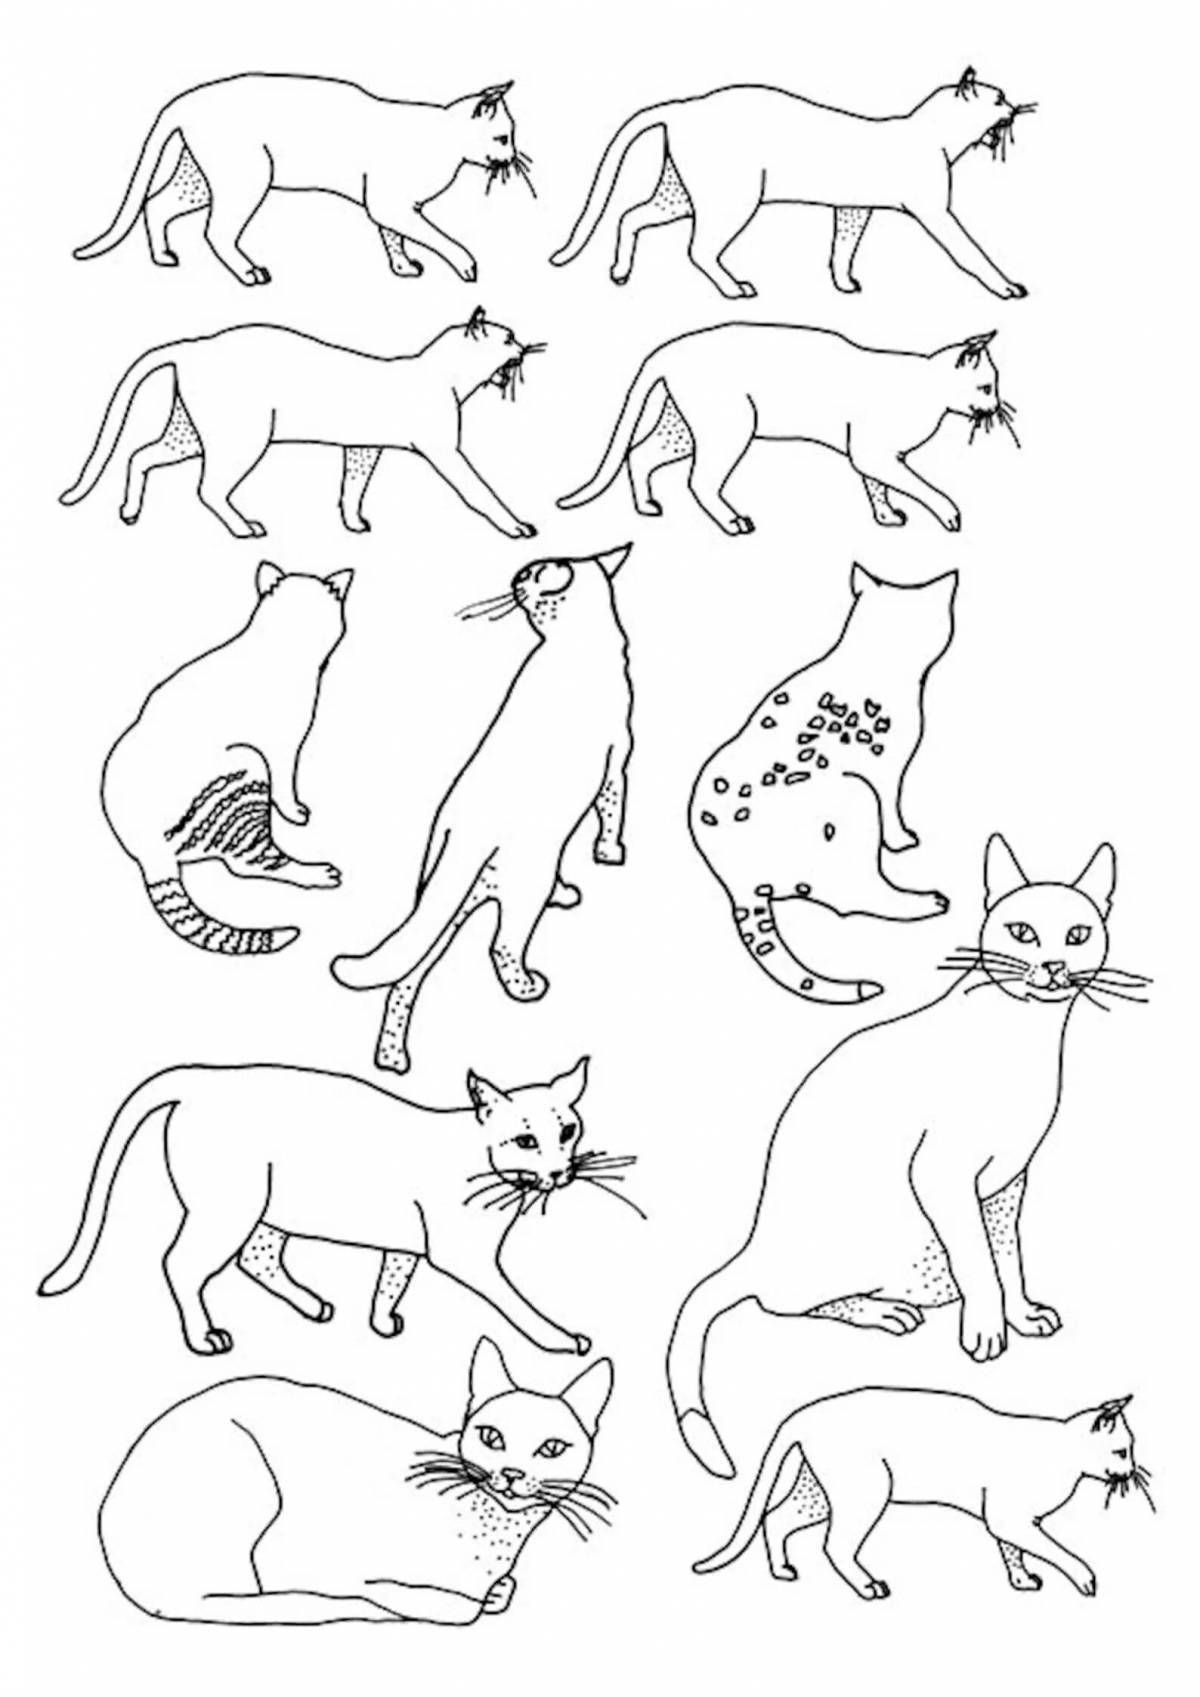 Coloring cat breeds with names